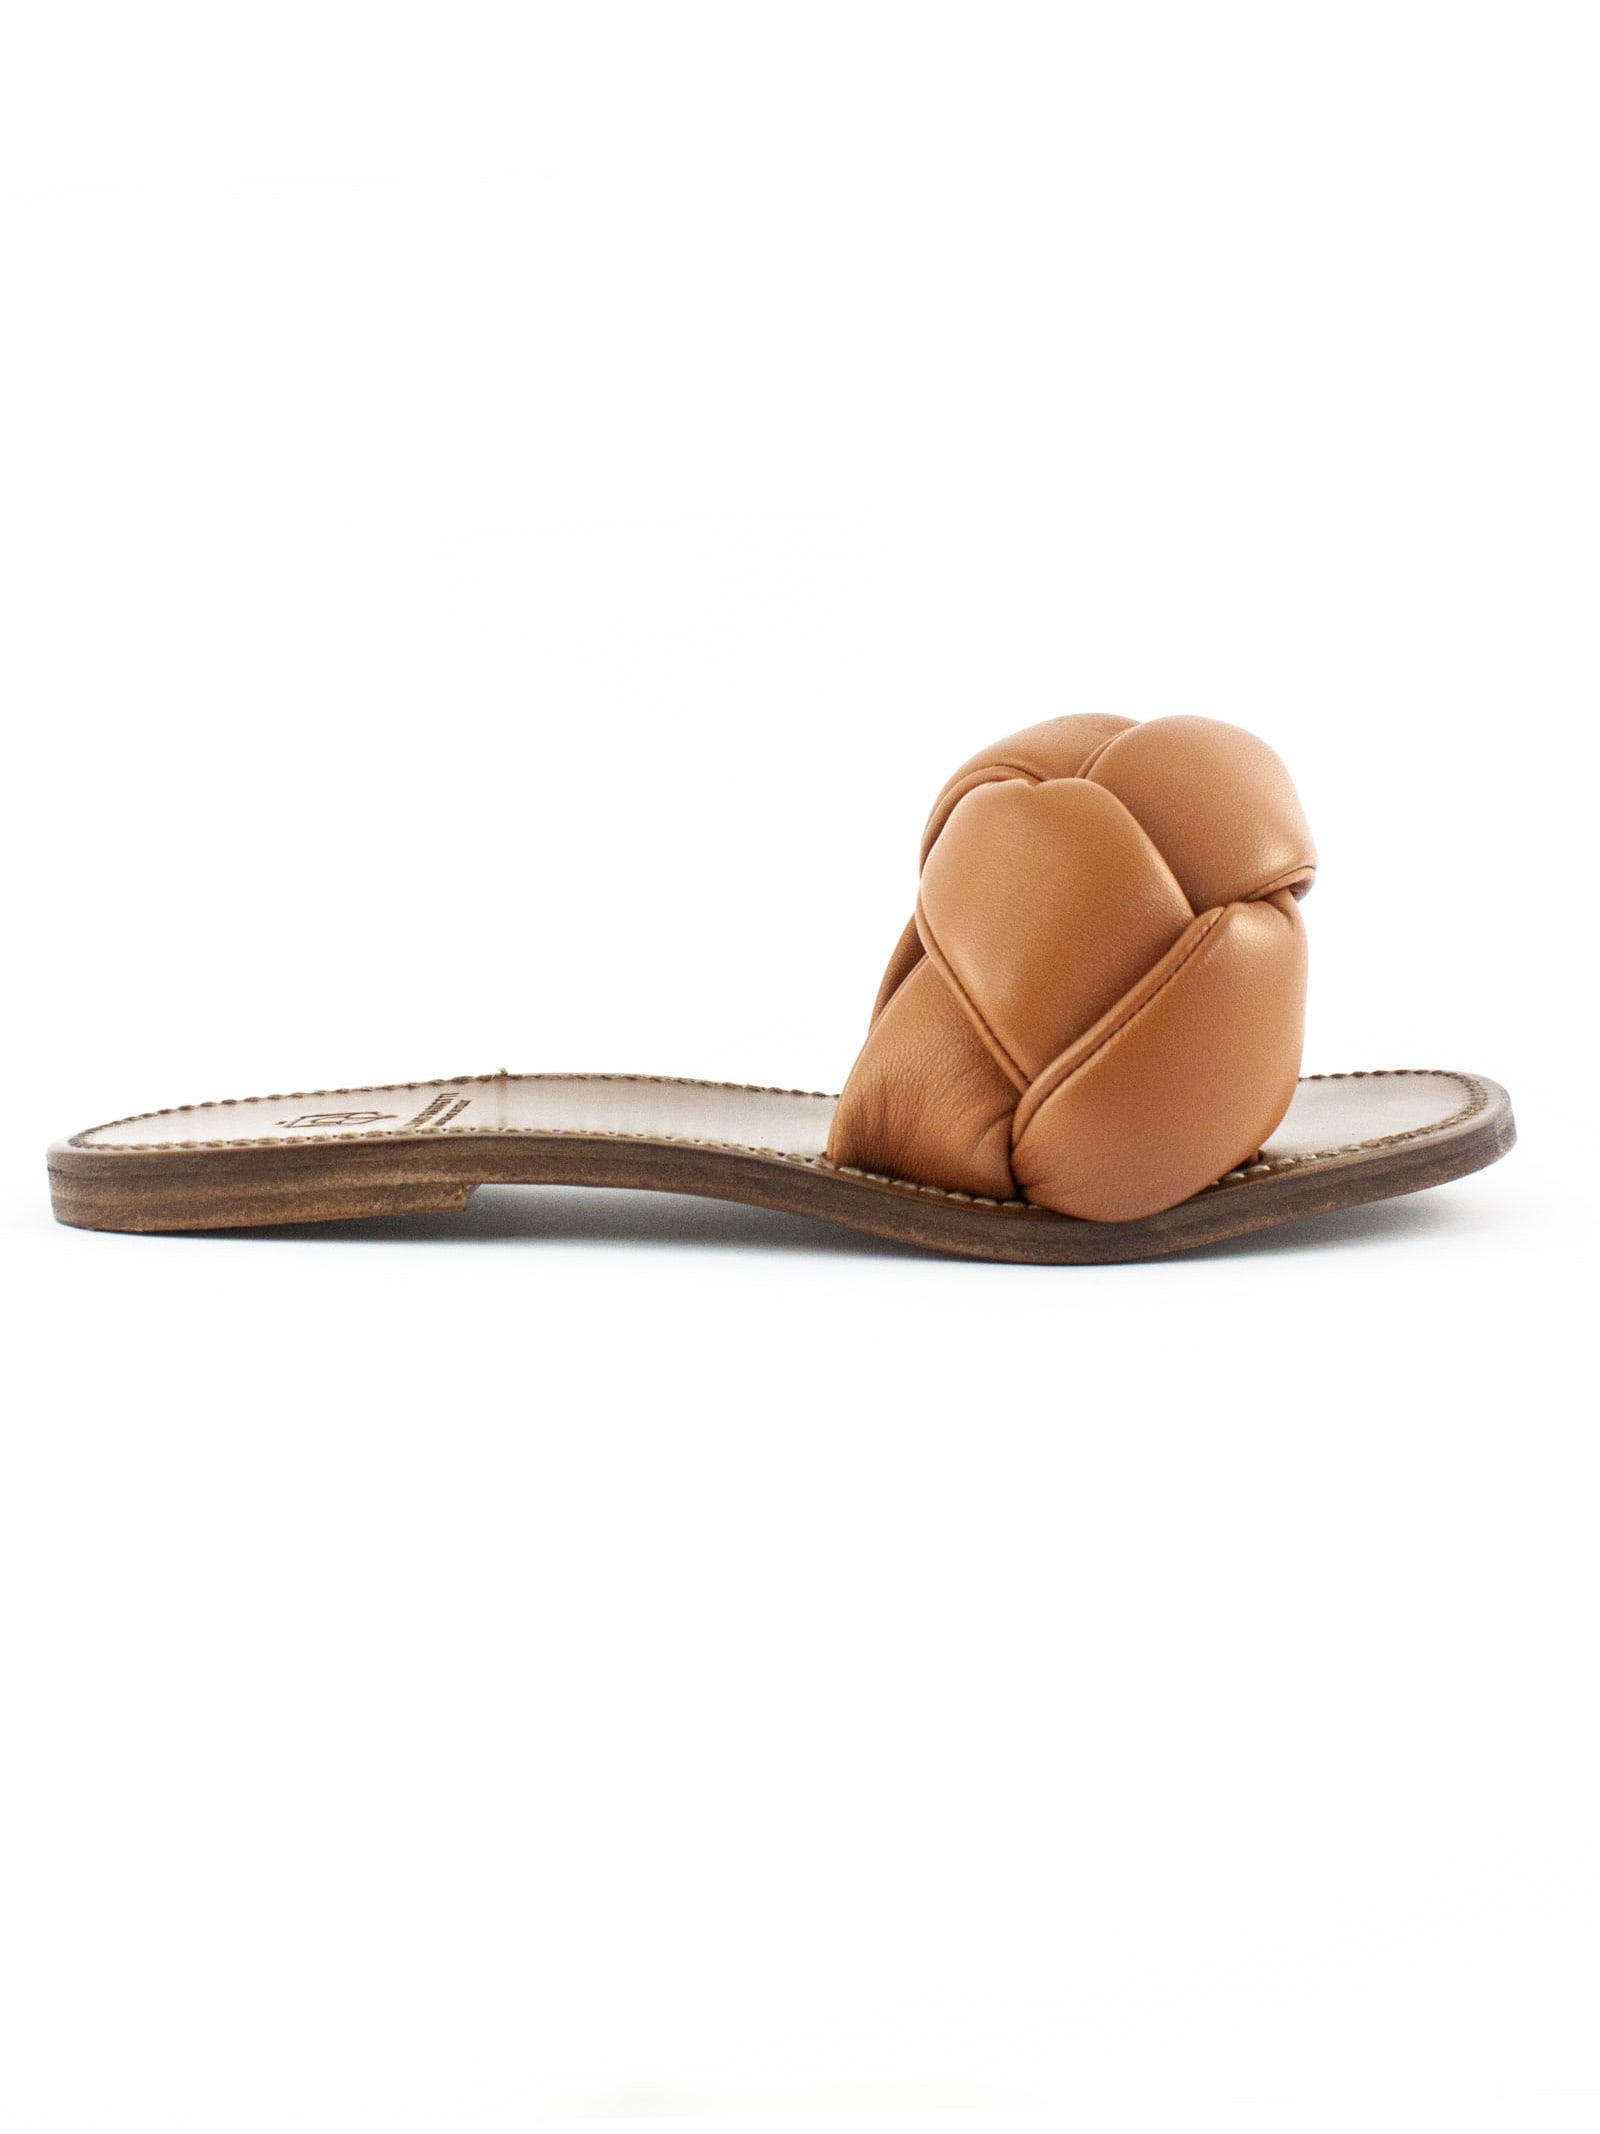 Silvano Sassetti Brown Leather Low Sandals